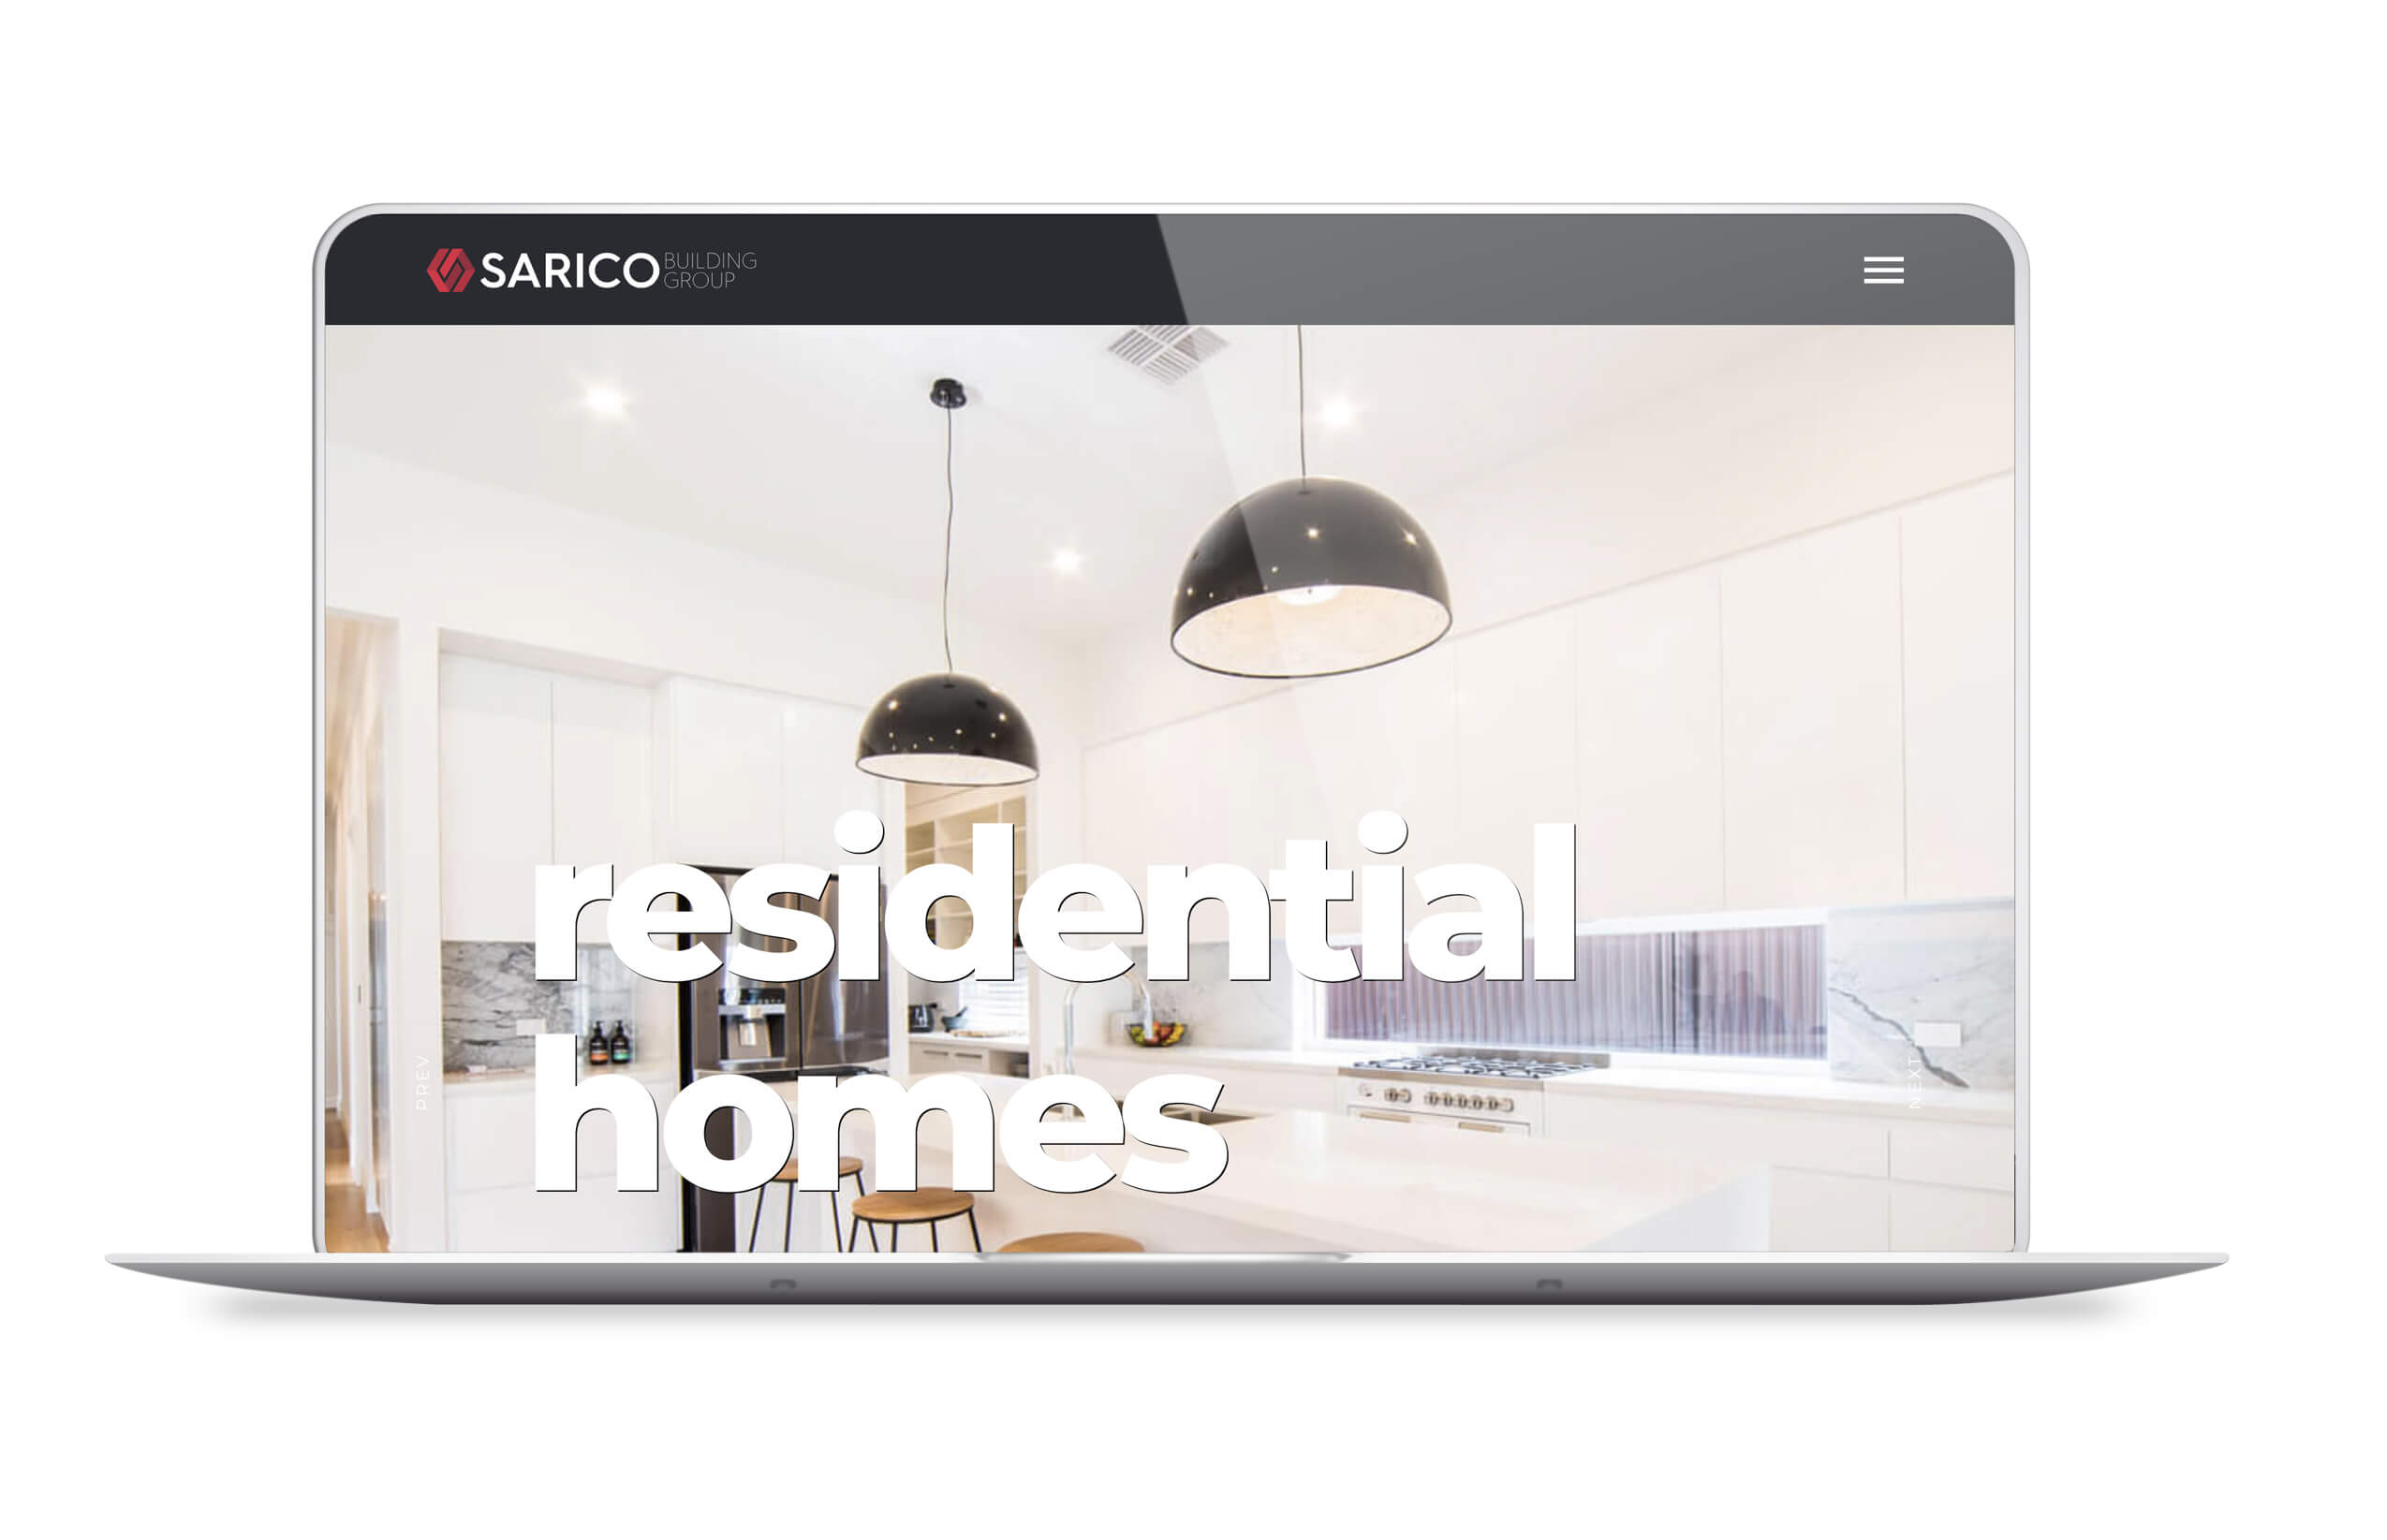 Icon Web Design Adelaide. Image of a Sarico Building Group web page displayed on a laptop.